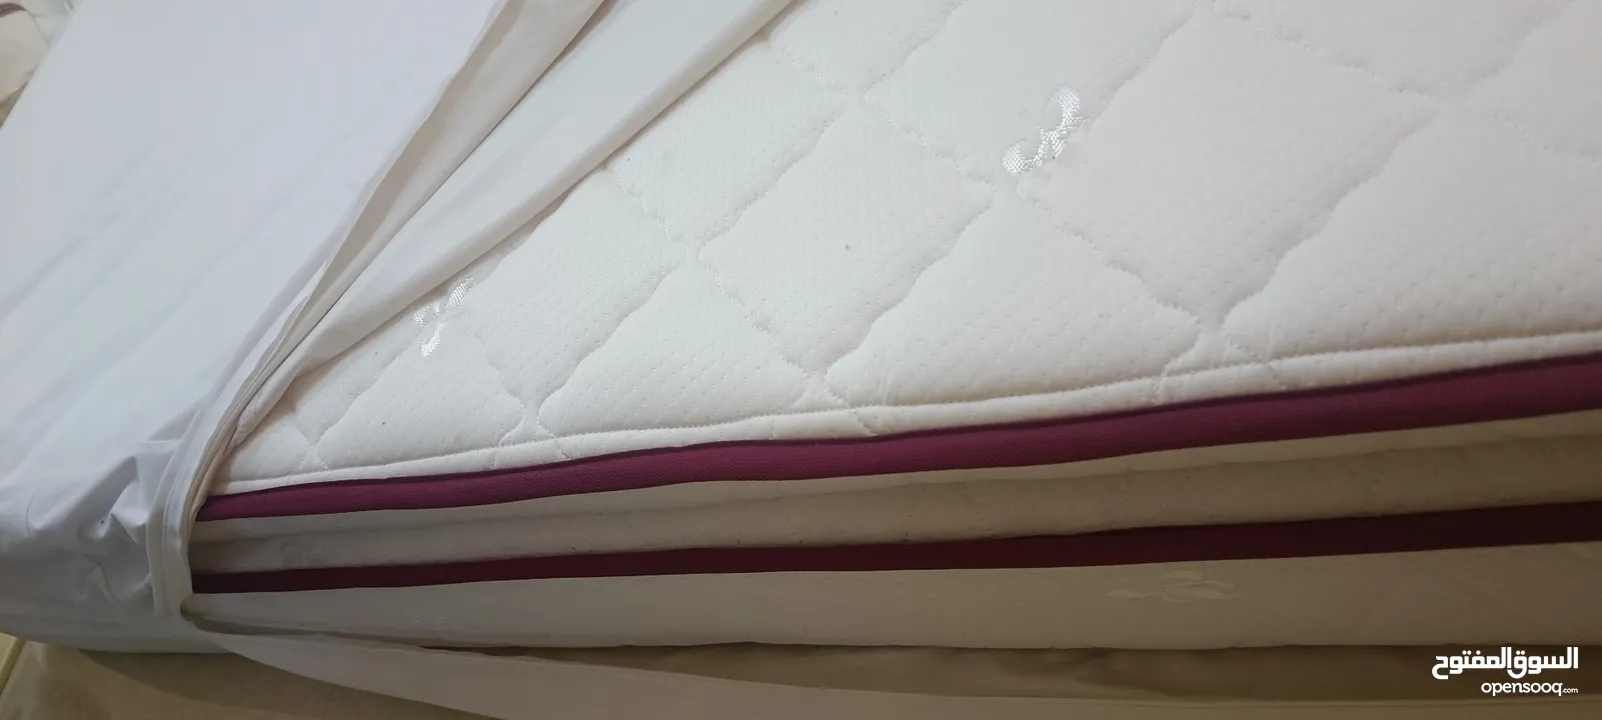 Medical King size mattress 180x200cm from Danube home